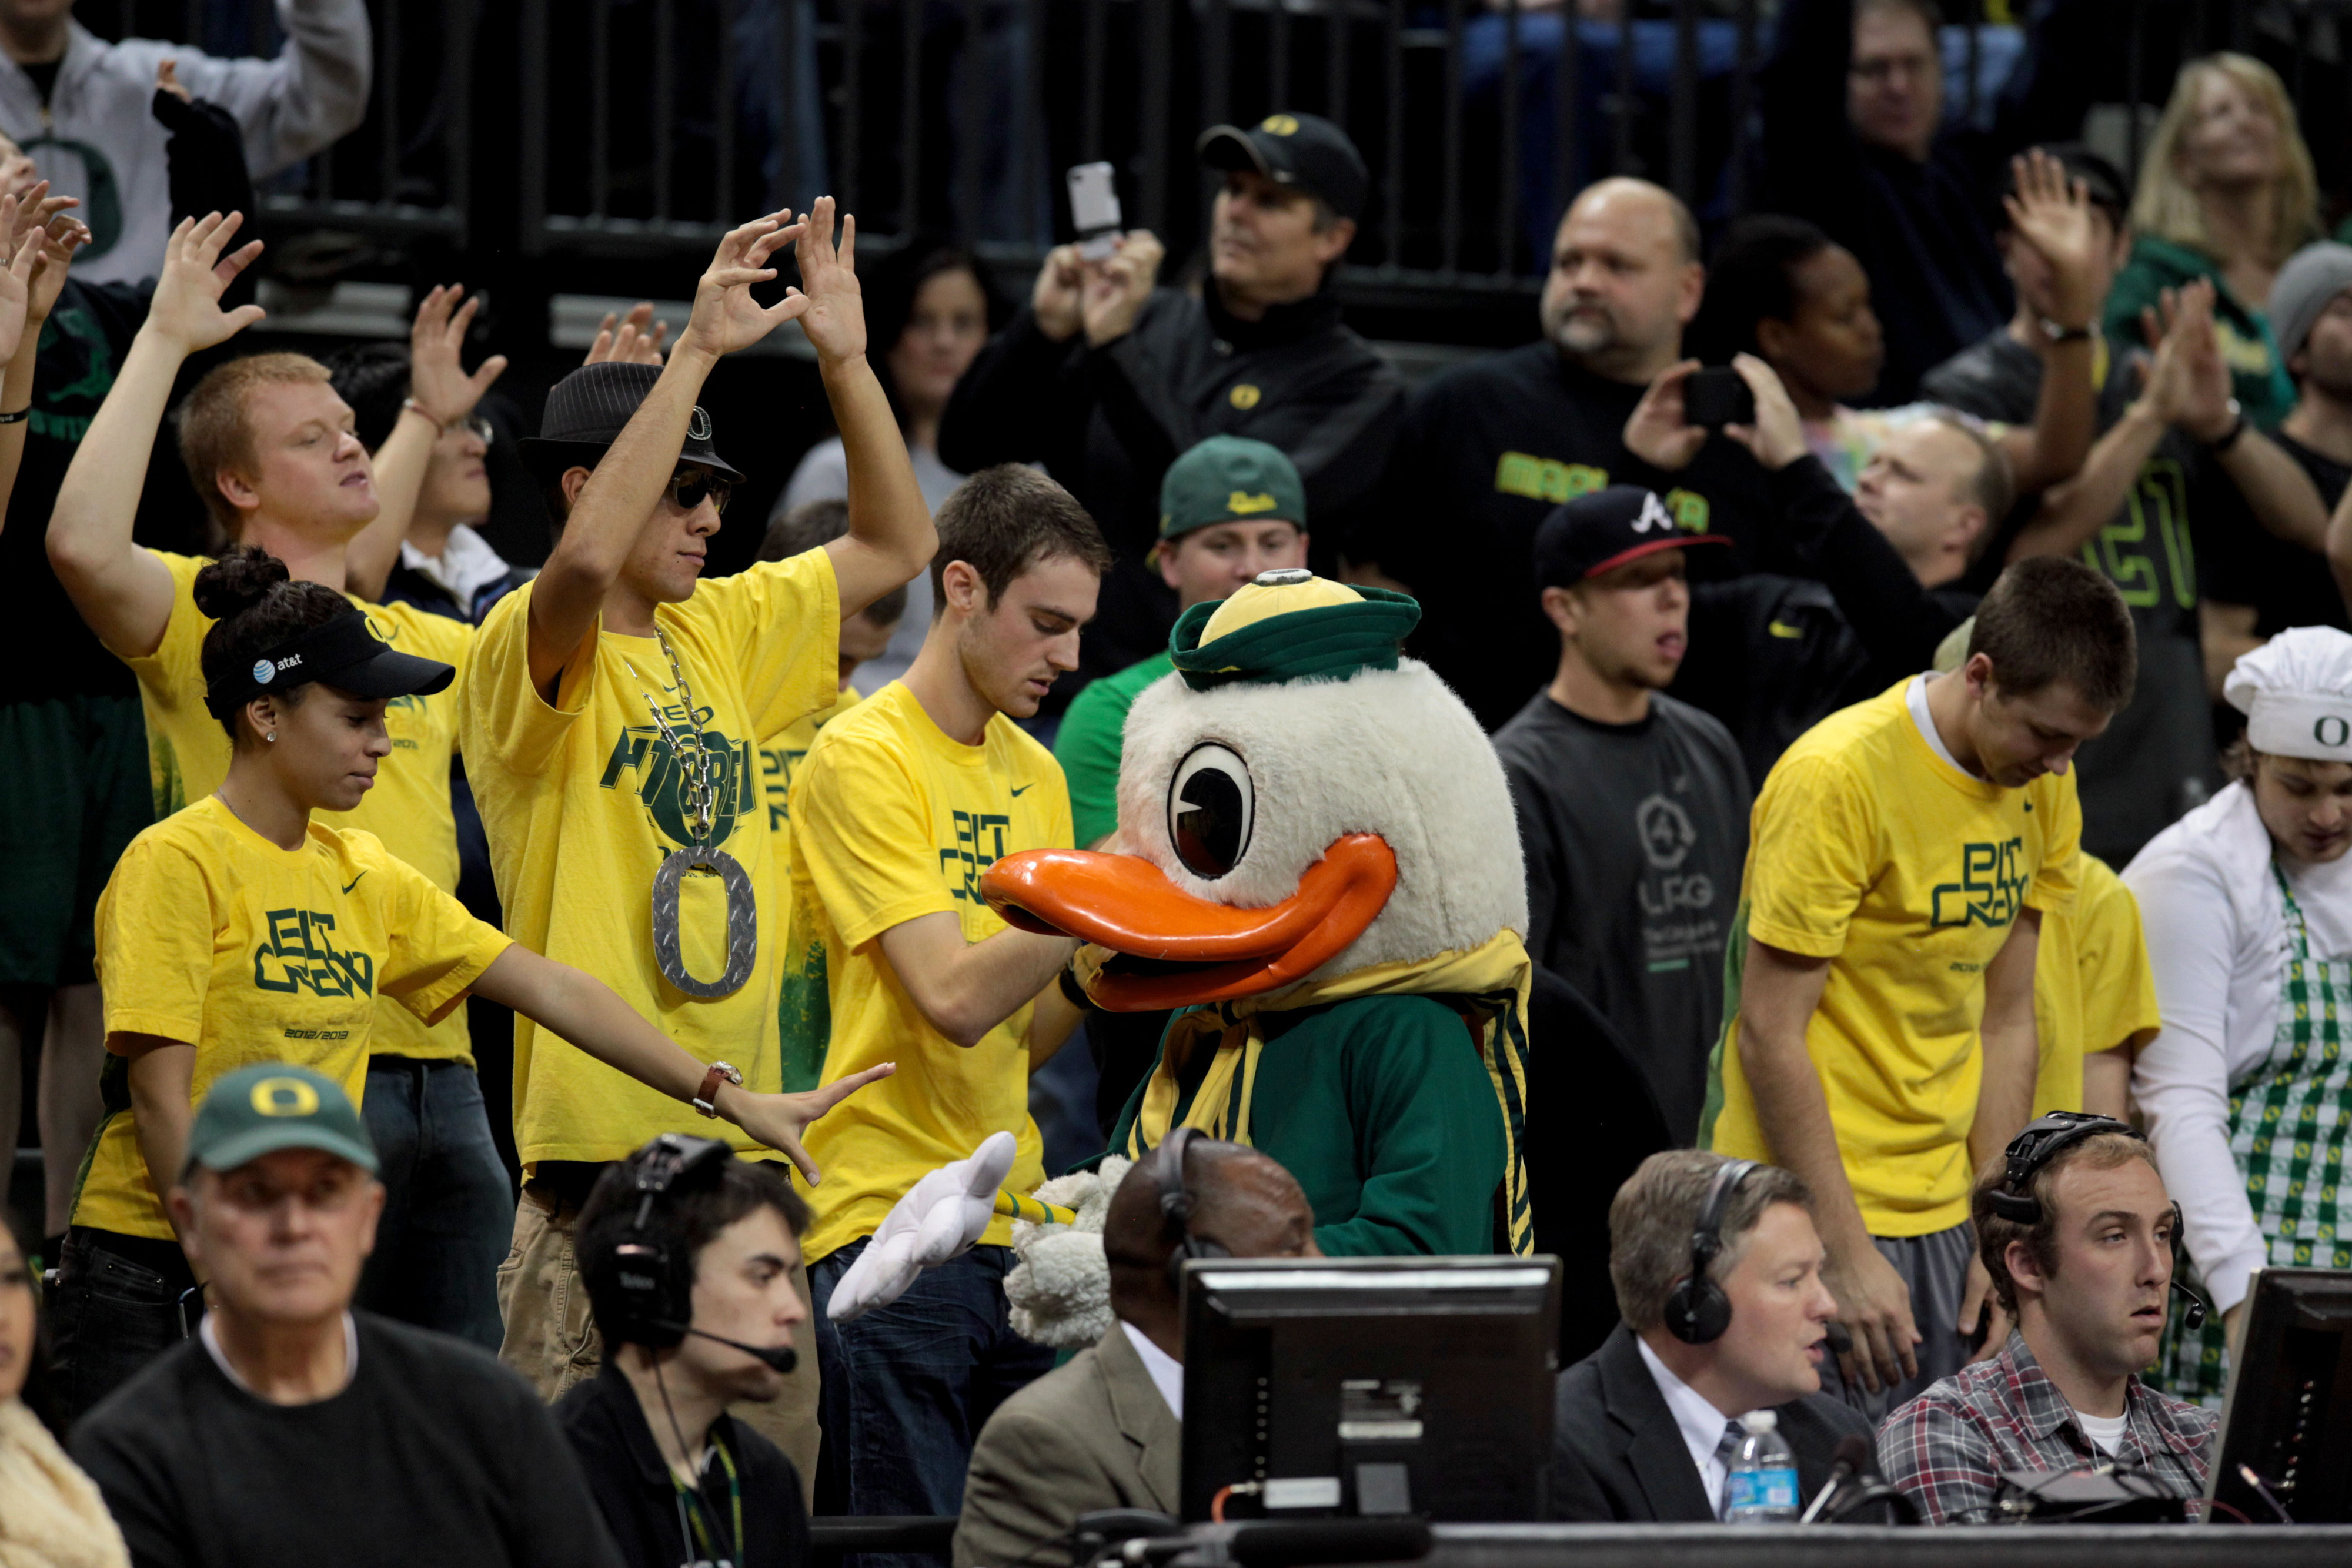 The Ducks are 3 sets away from a National Title